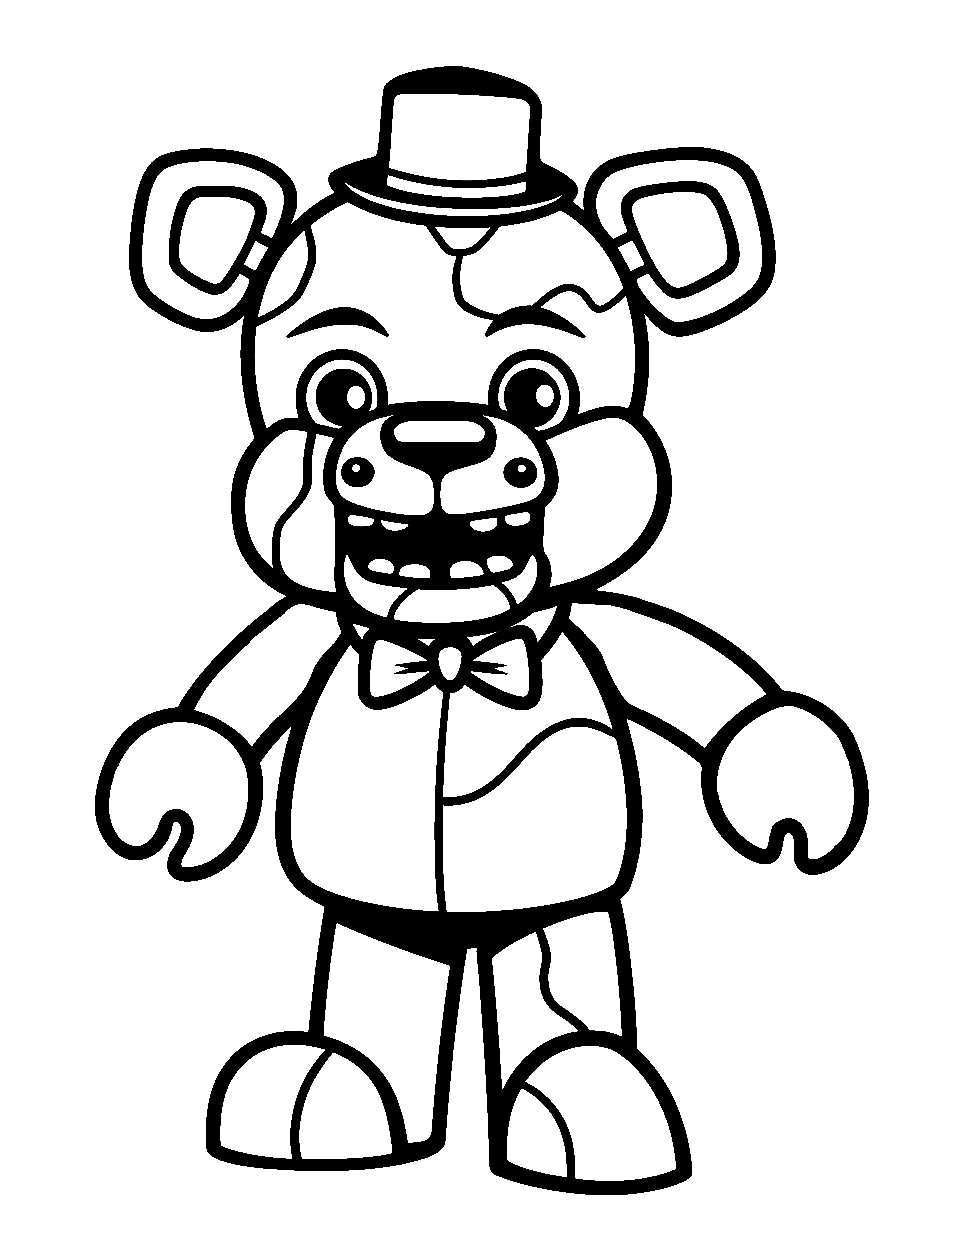 Simple Freddy Five Nights at Freddys Coloring Page - A simplistic drawing of Freddy with a clear background.